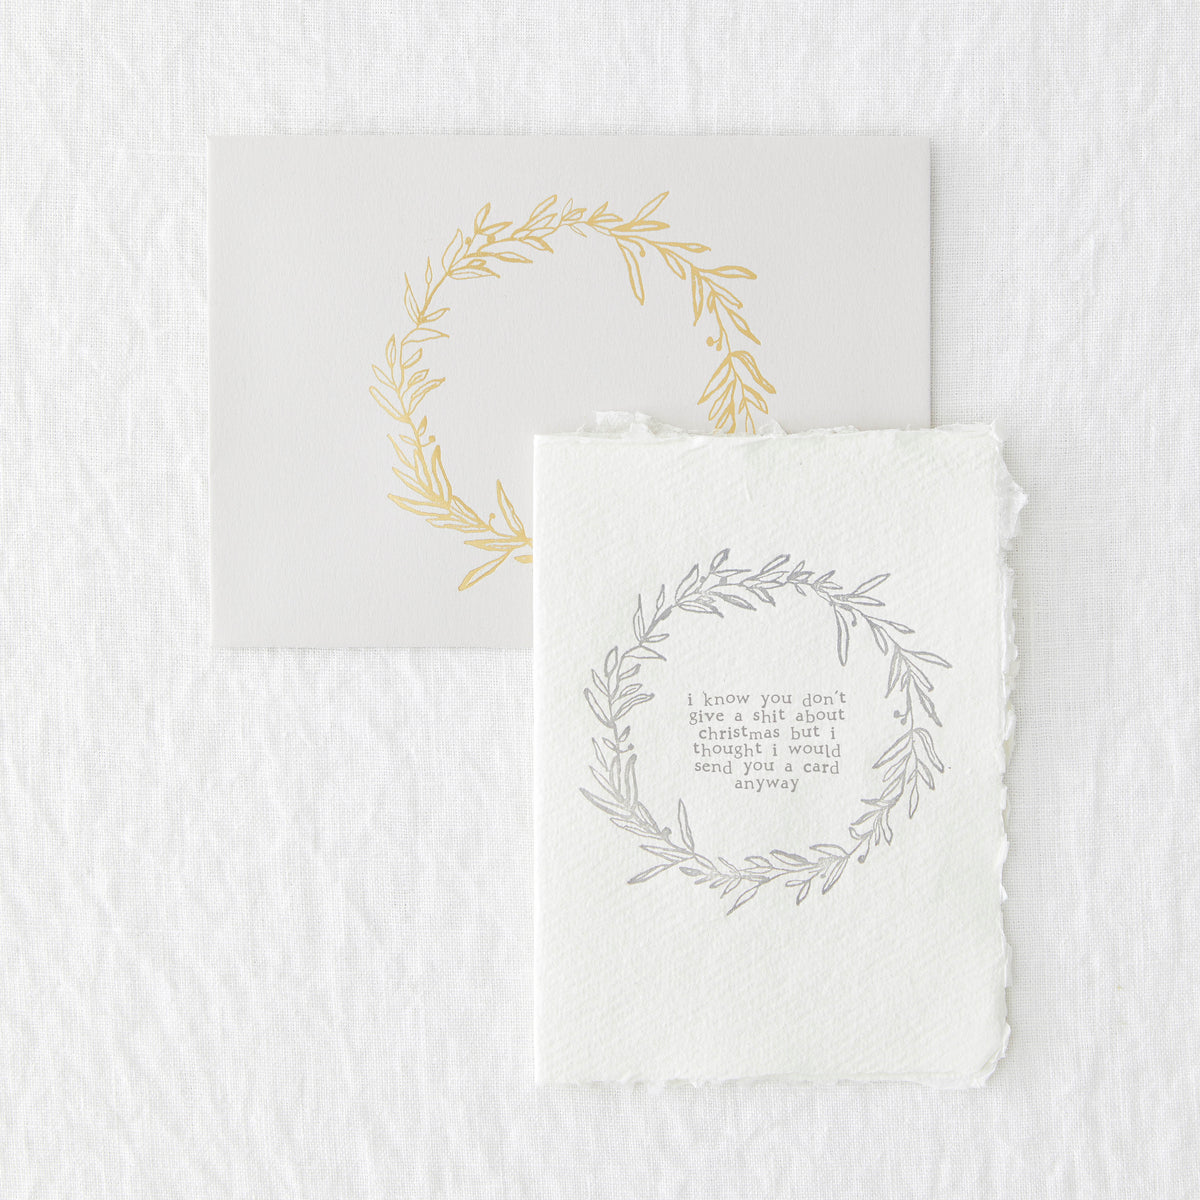 An image of a letterpressed christmas greetings card and envelope. The light grey envelope has a ring of gold foliage in the centre and the card has teh same but printed in grey with the words in the centre &#39;I know you don&#39;t give a shit about christmas but I thought I would send you a card anyway&#39;.